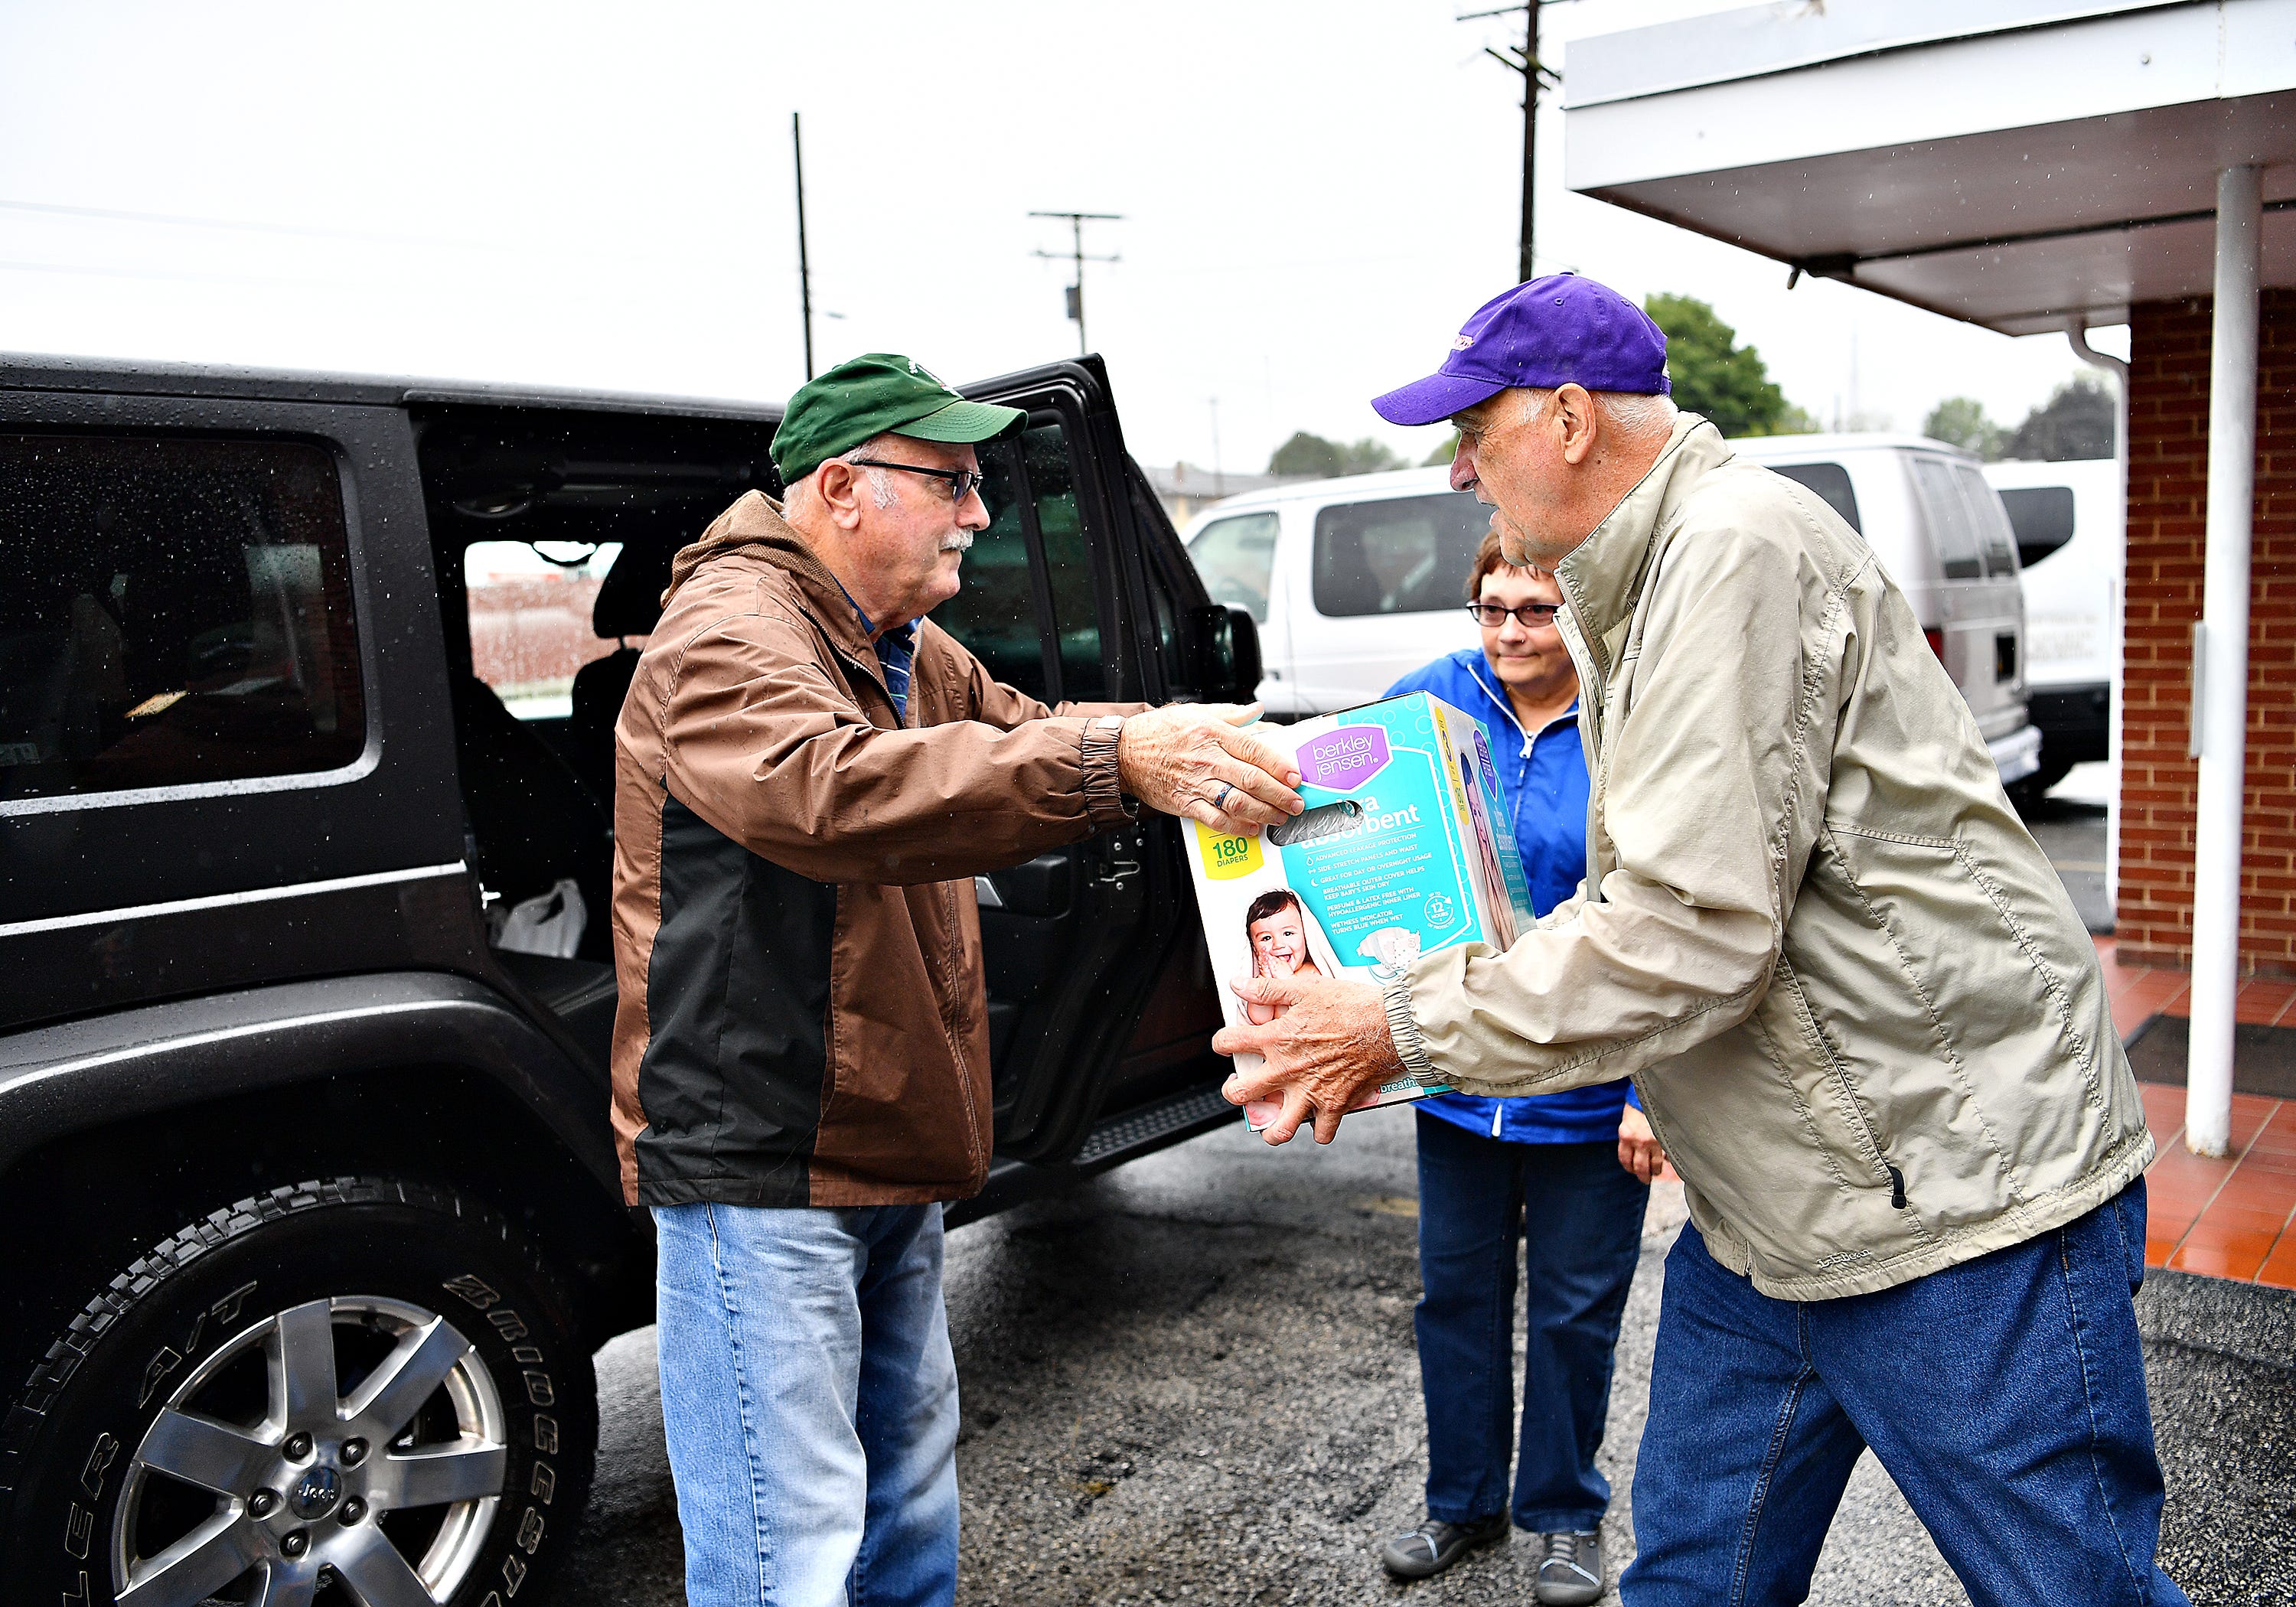 Fred Noble, front right, of Bailey Coach, receives a donation from Dennis Delp, left, and Linda Delp, both of West Manchester Township, at Bailey Coach in West Manchester Township, Tuesday, Sept. 11, 2018. The items collected will be delivered to areas that are projected to be in the path of Hurricane Florence. Dawn J. Sagert photo